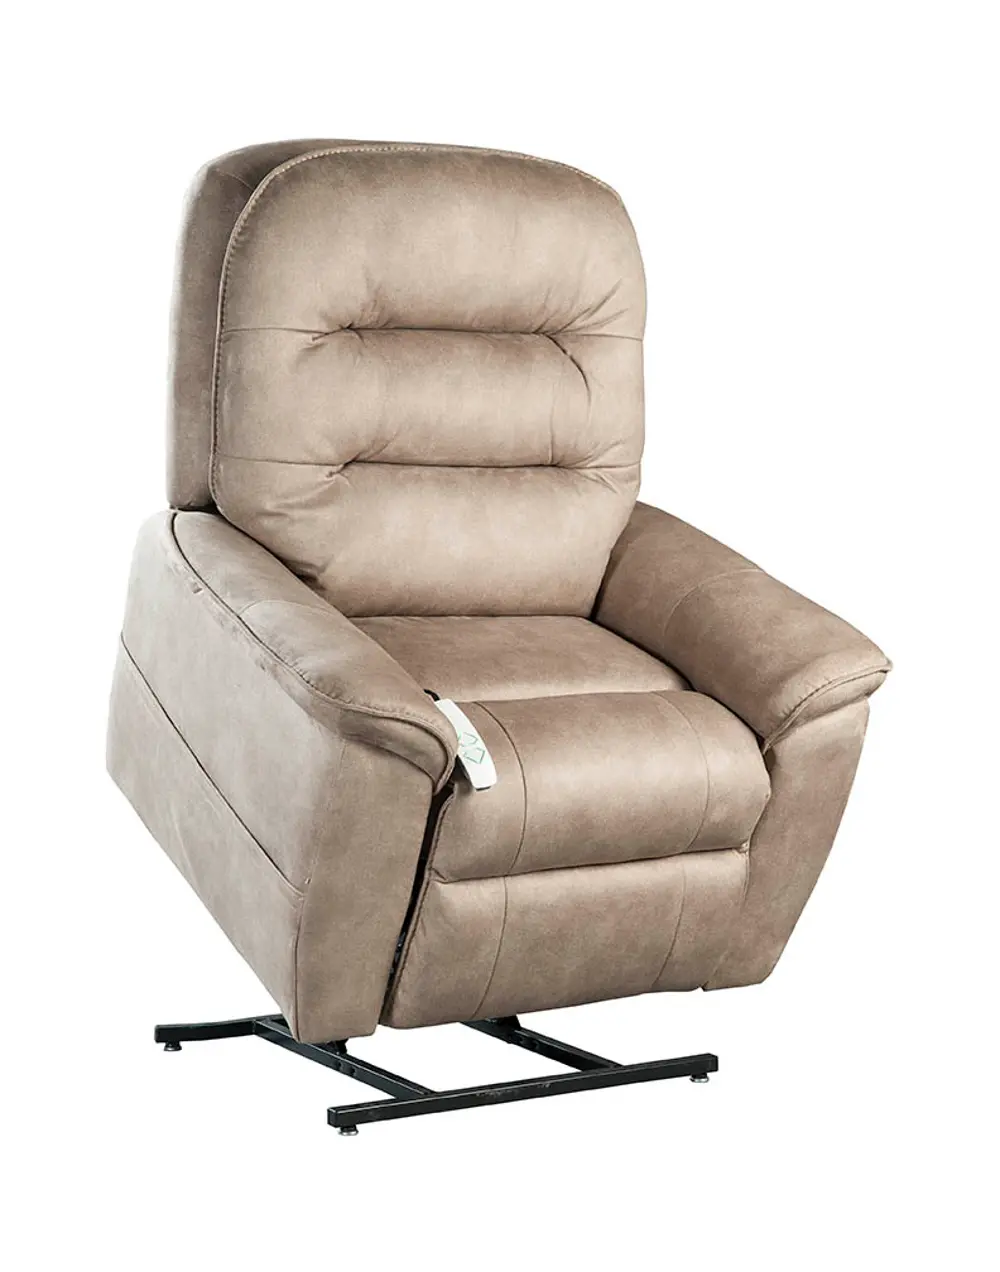 Vintage Power Reclining Lift Chair-1